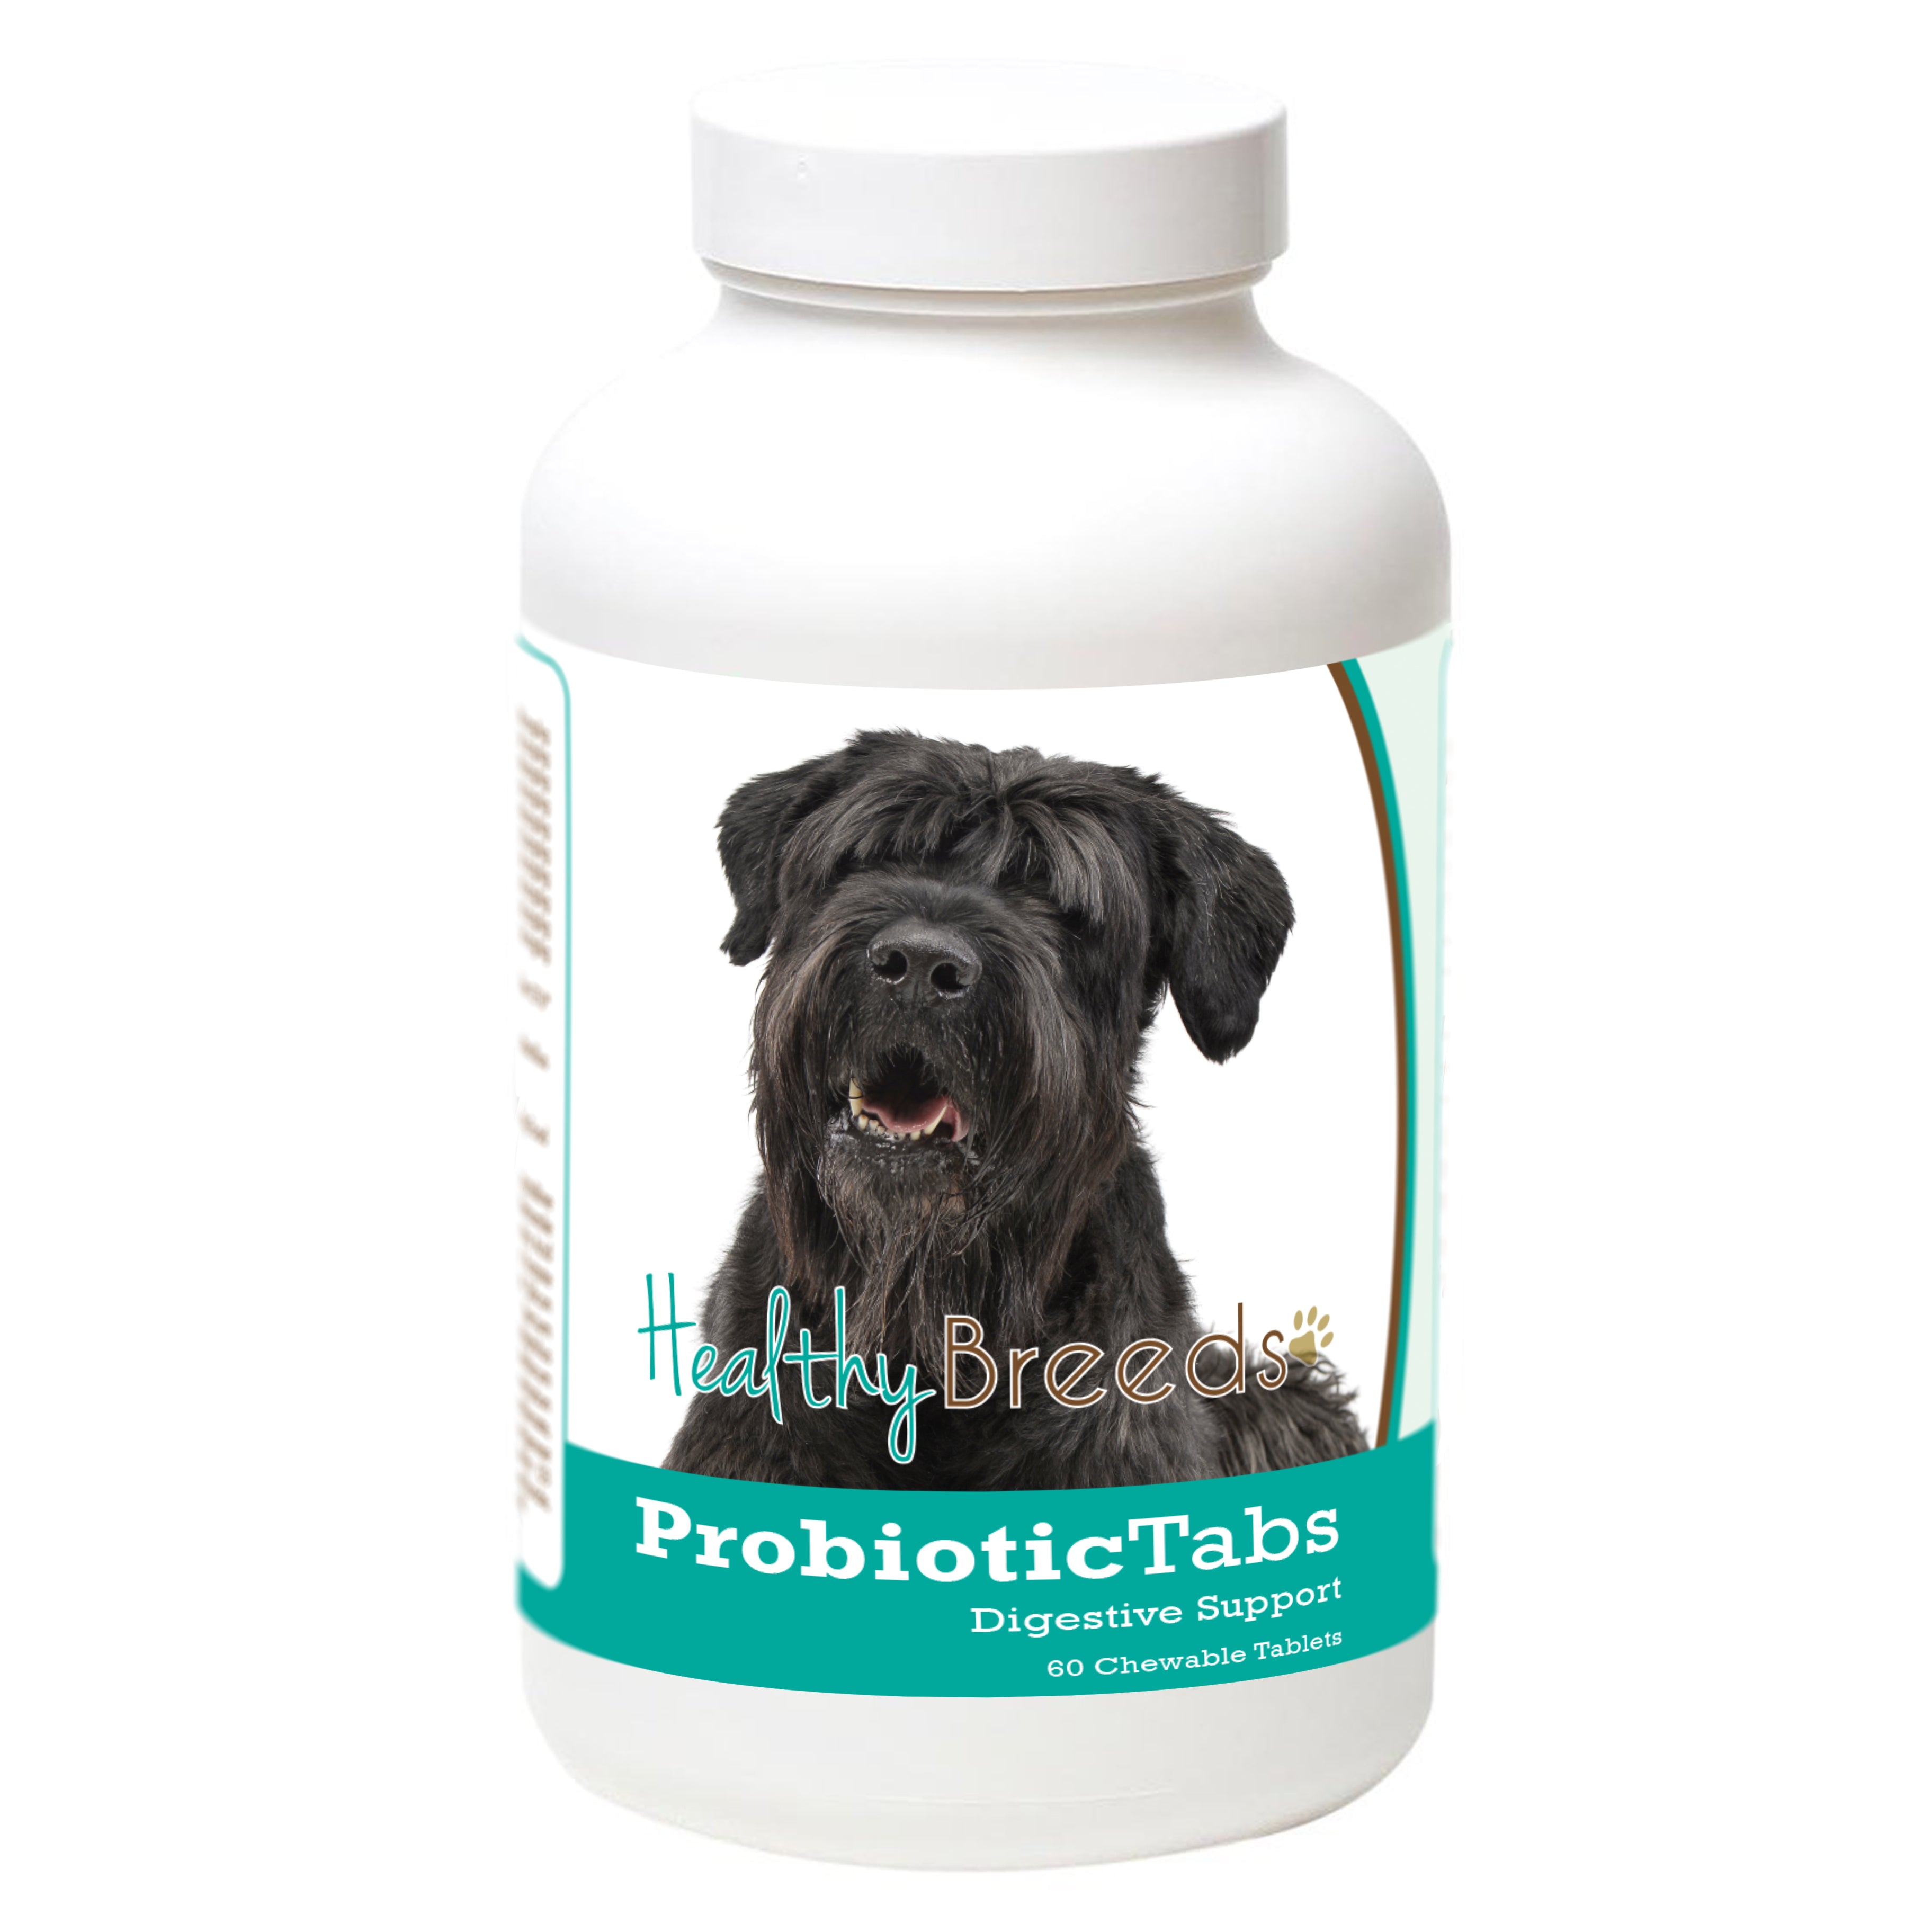 Black Russian Terrier Probiotic and Digestive Support for Dogs 60 Count